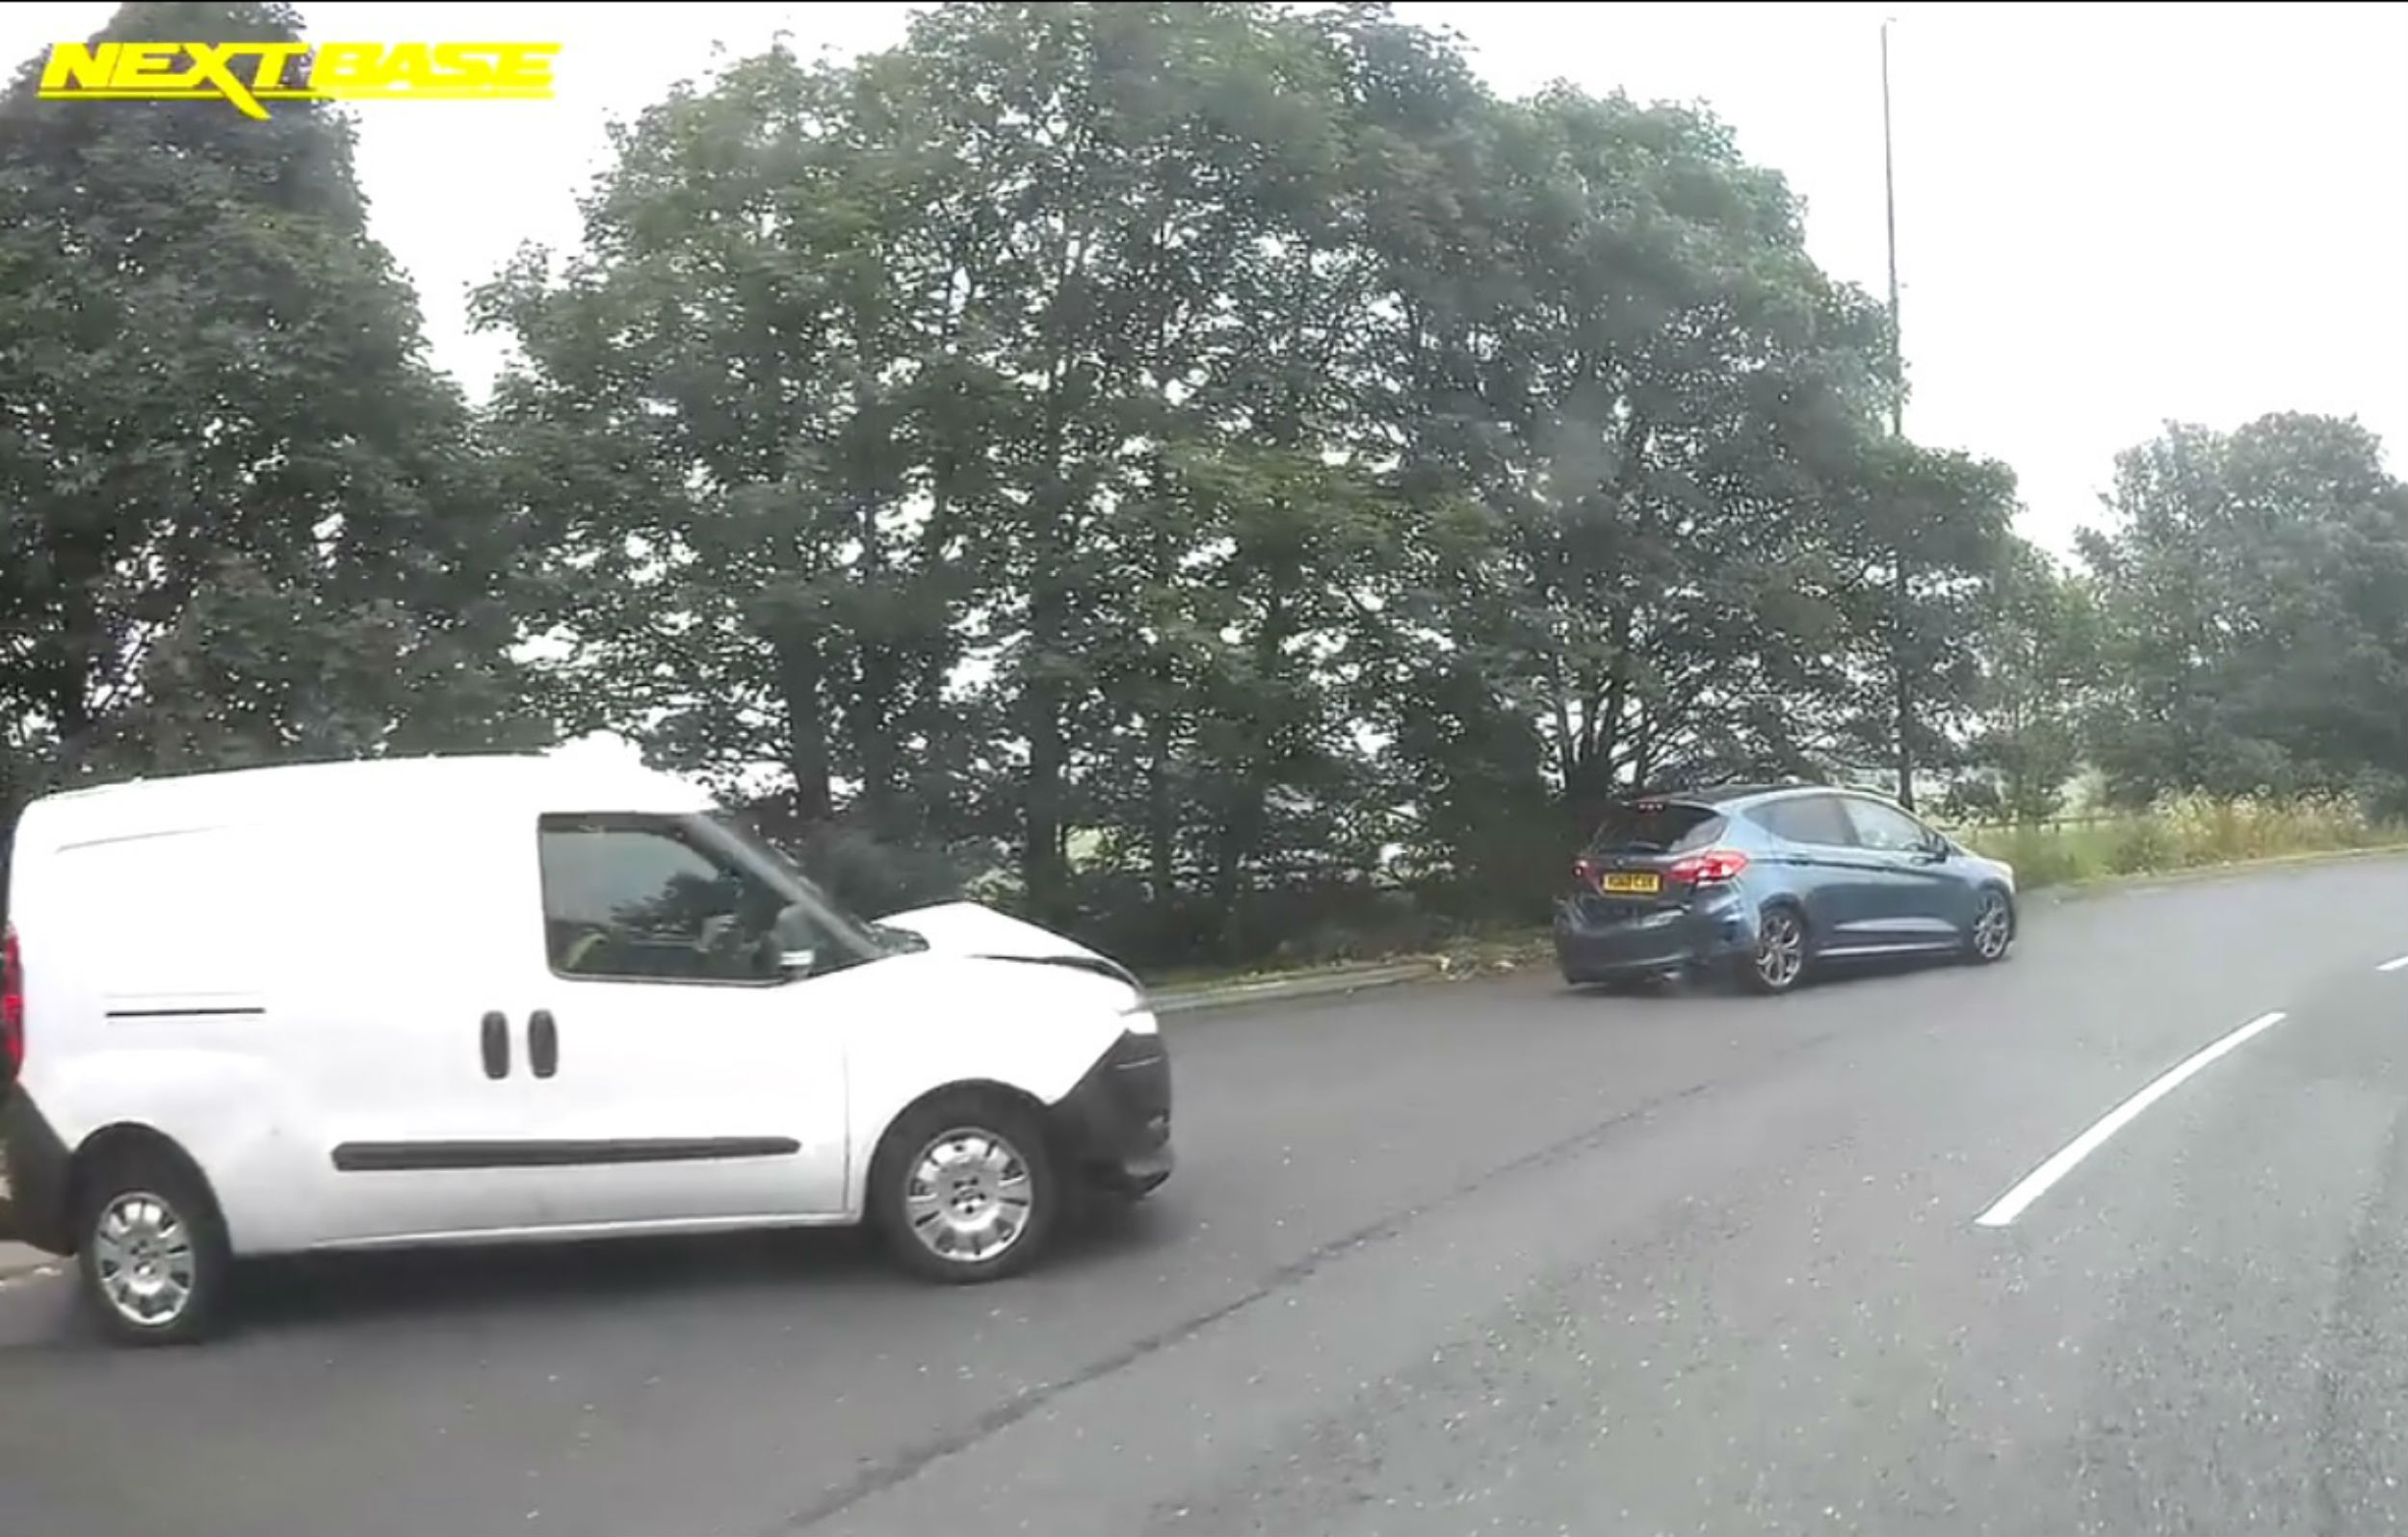 The two cars parked on the roundabout